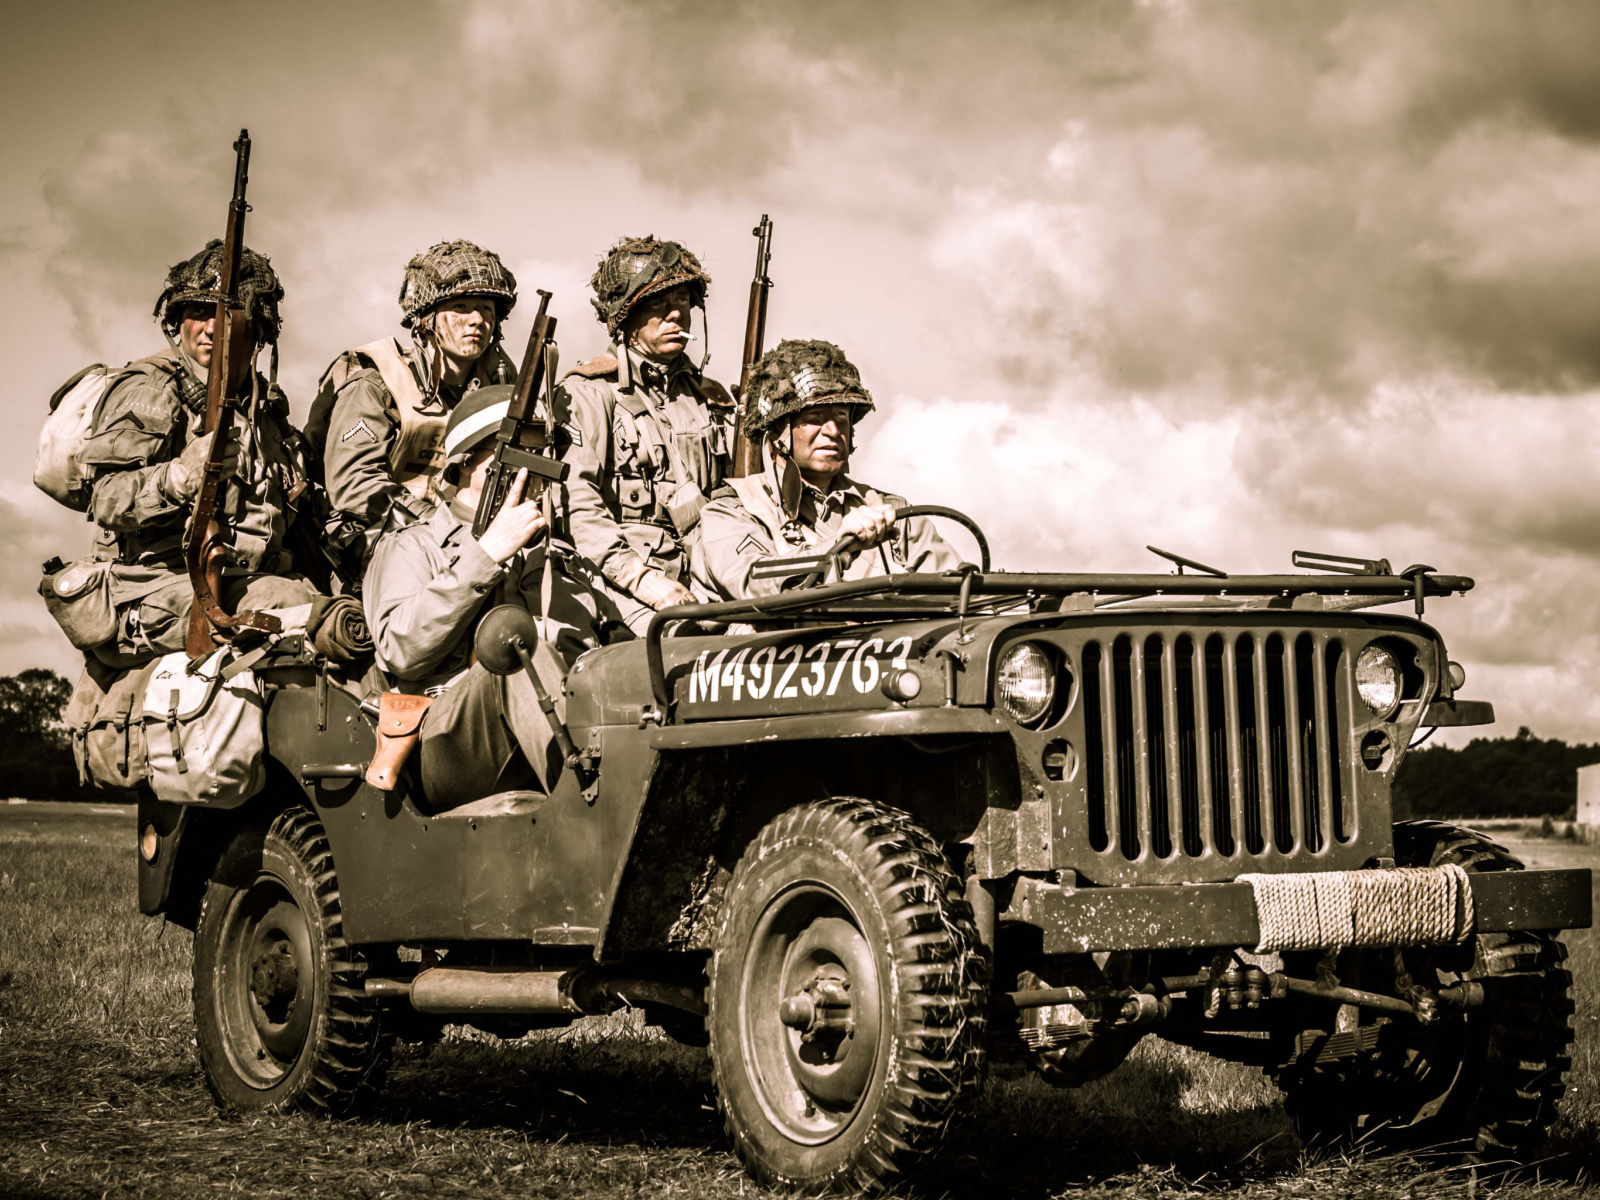 Soldiers on Jeep wallpaper 1600x1200